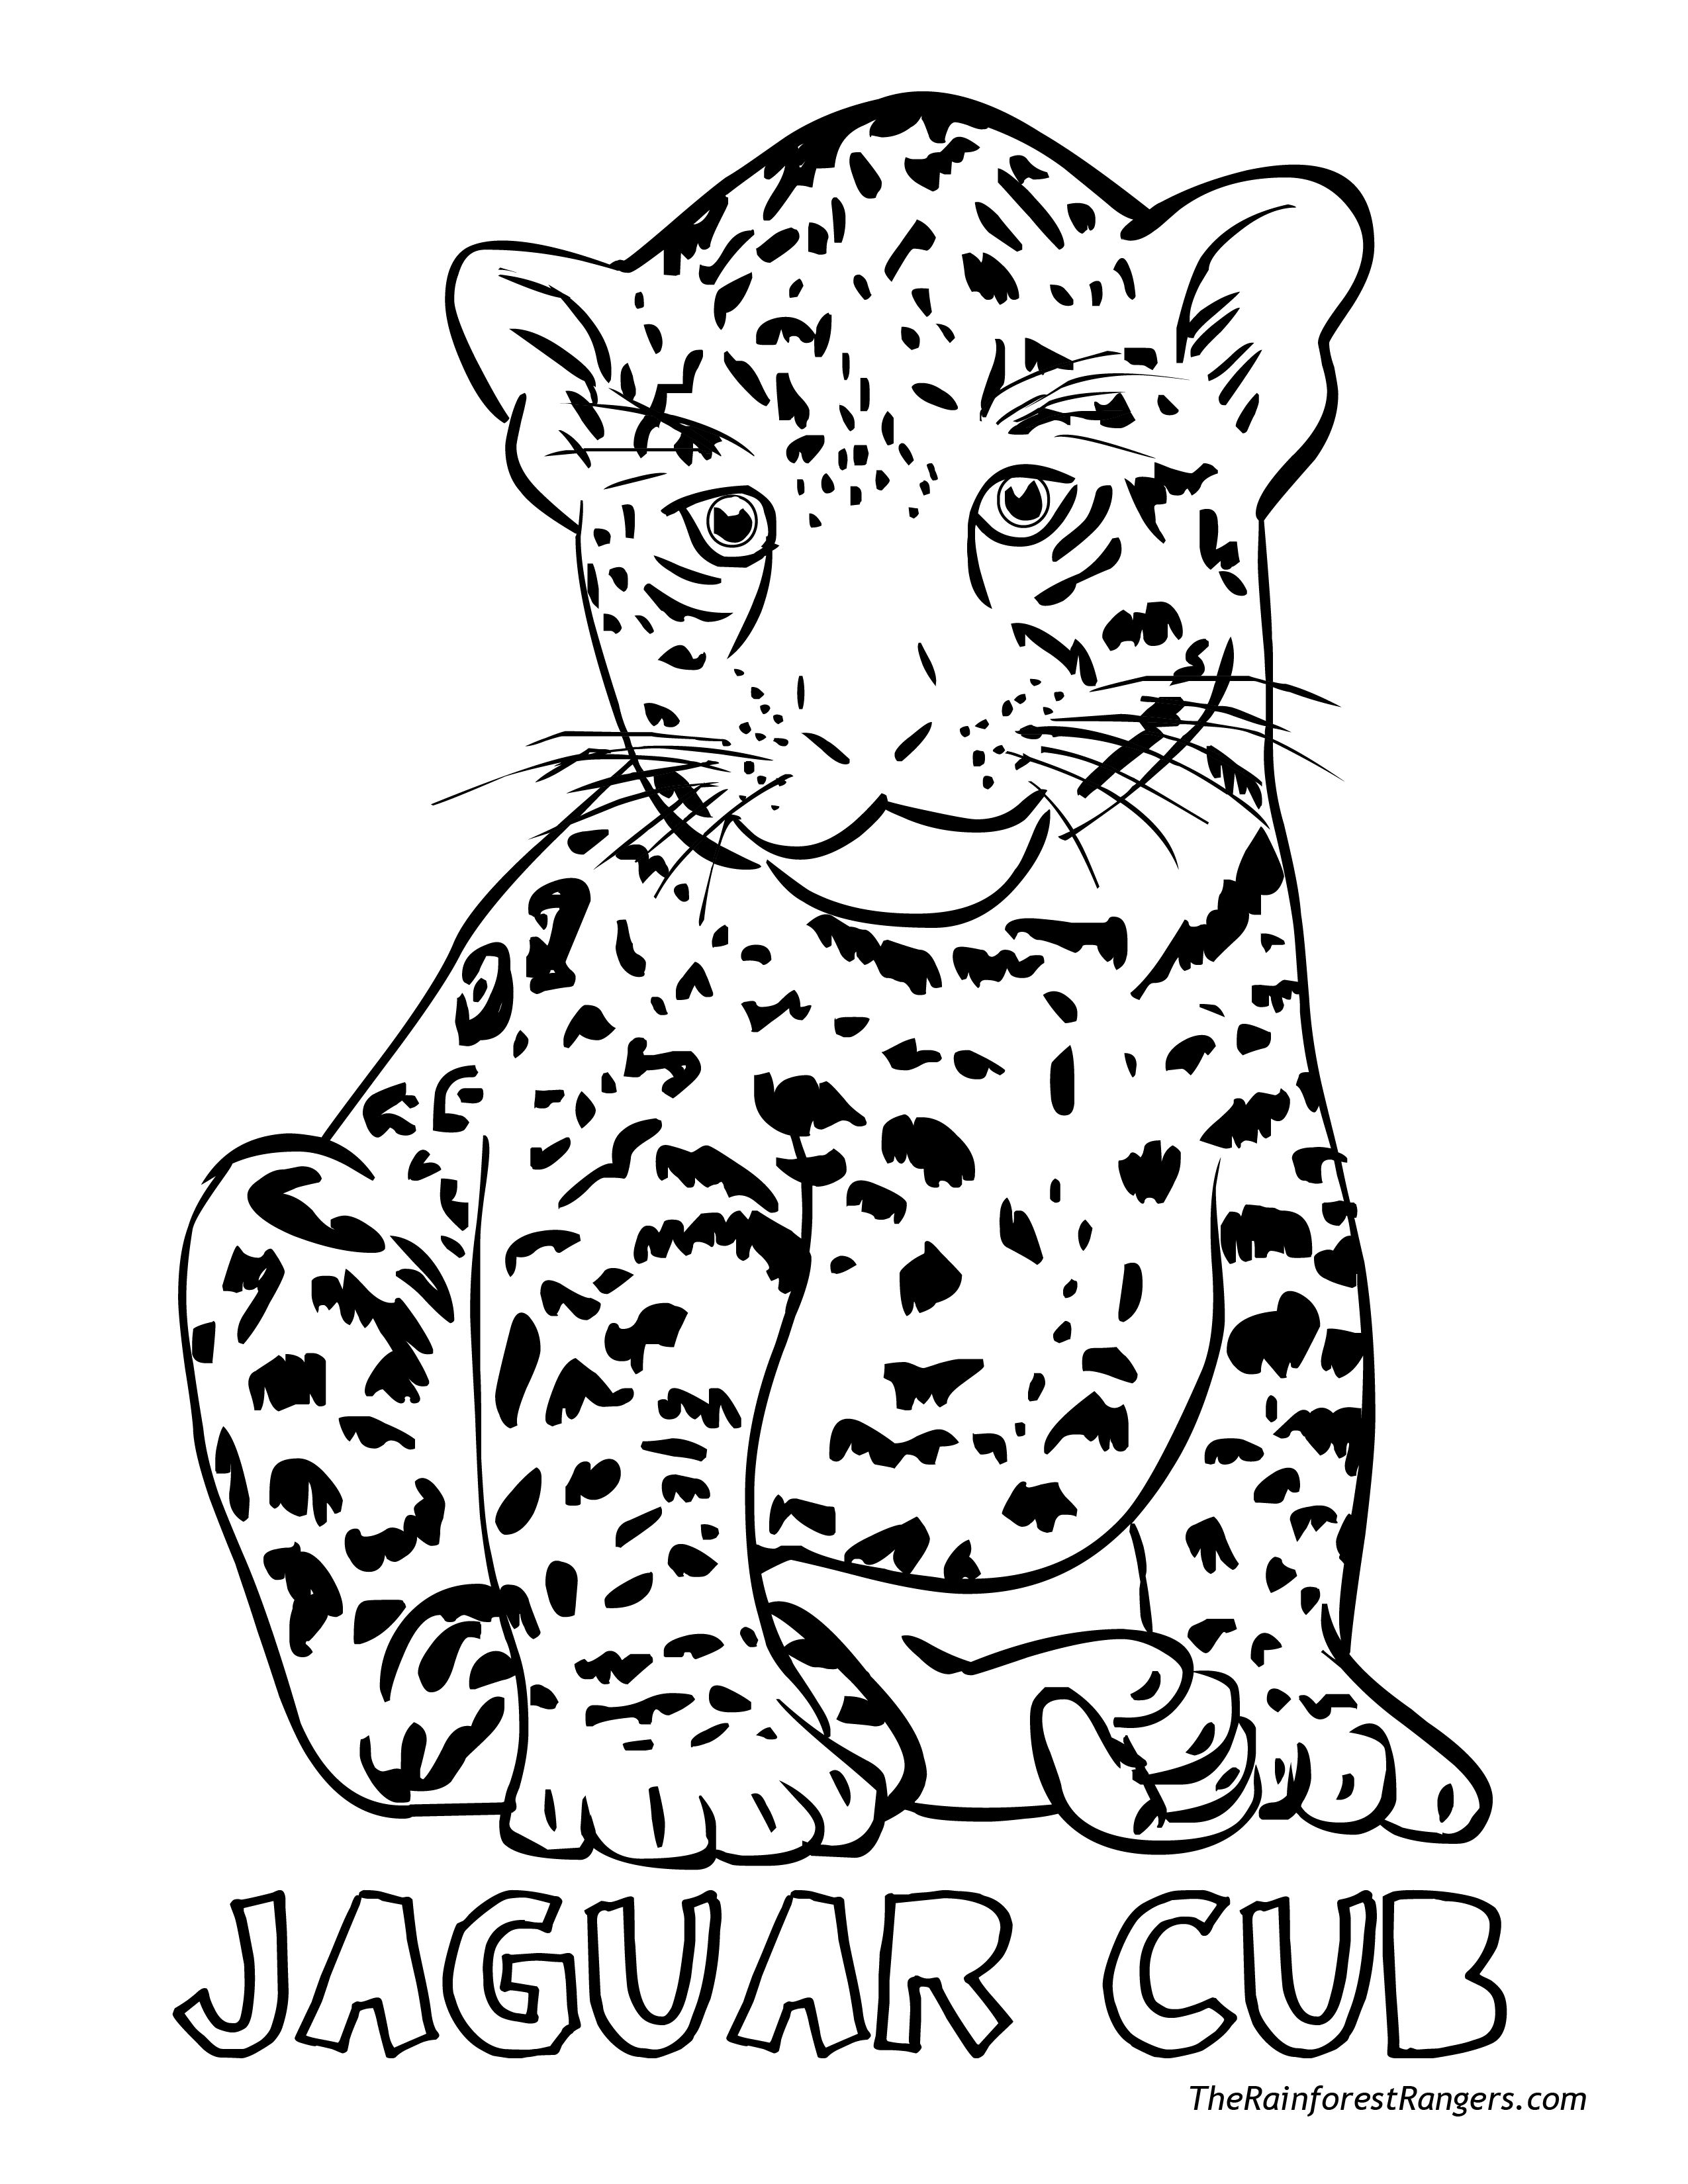 Animals In The Rainforest Coloring Pages Coloring Ideas Rainforest Coloringges To Print Awesome For Kids